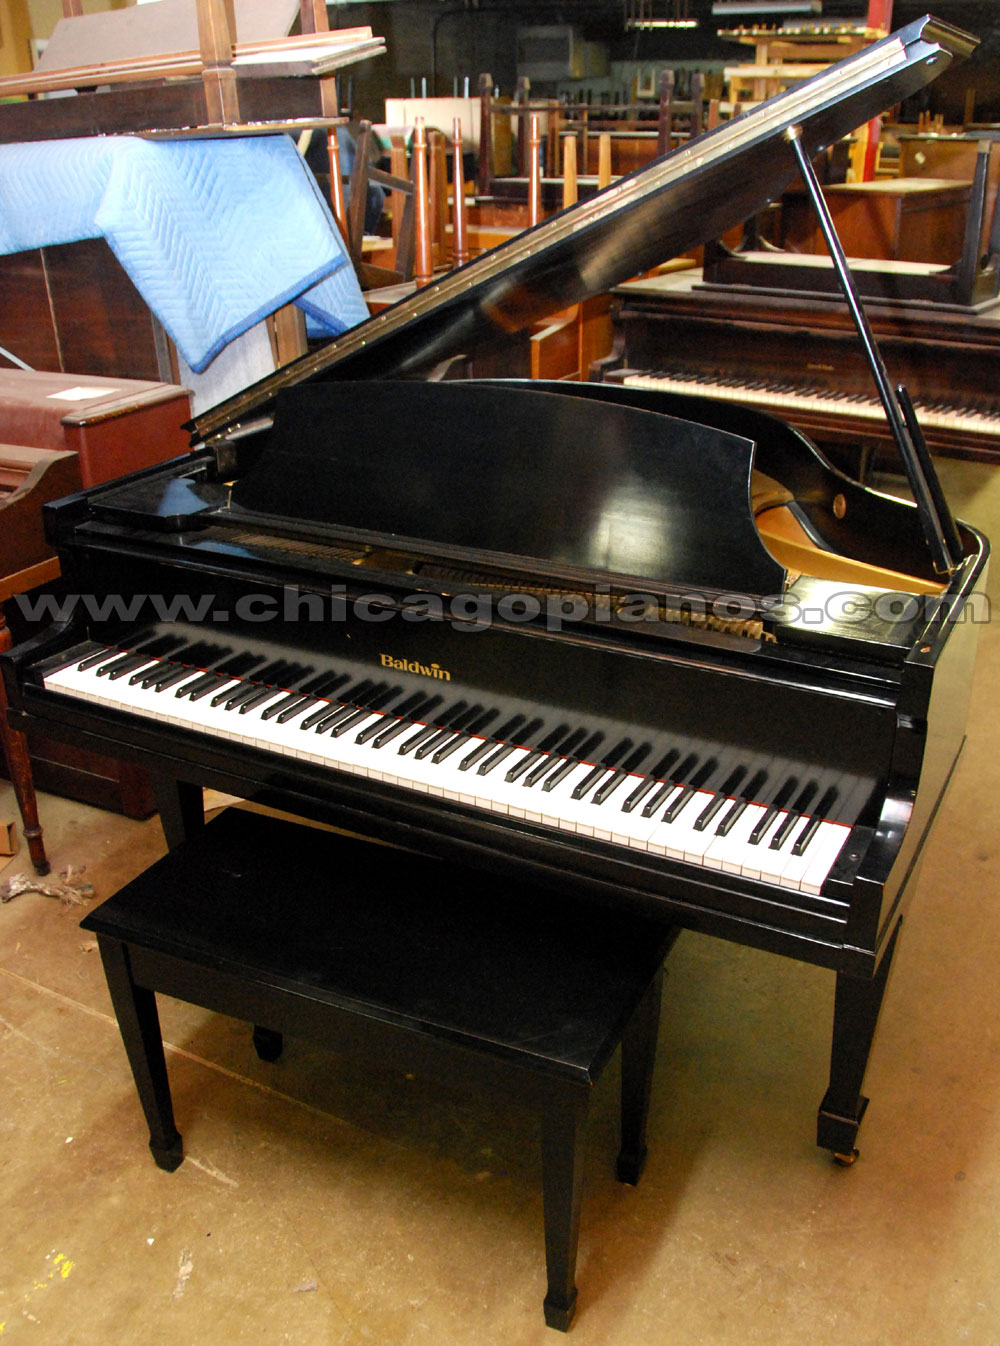 Chicago Piano Store / Pianos in Chicago - Used and New ...